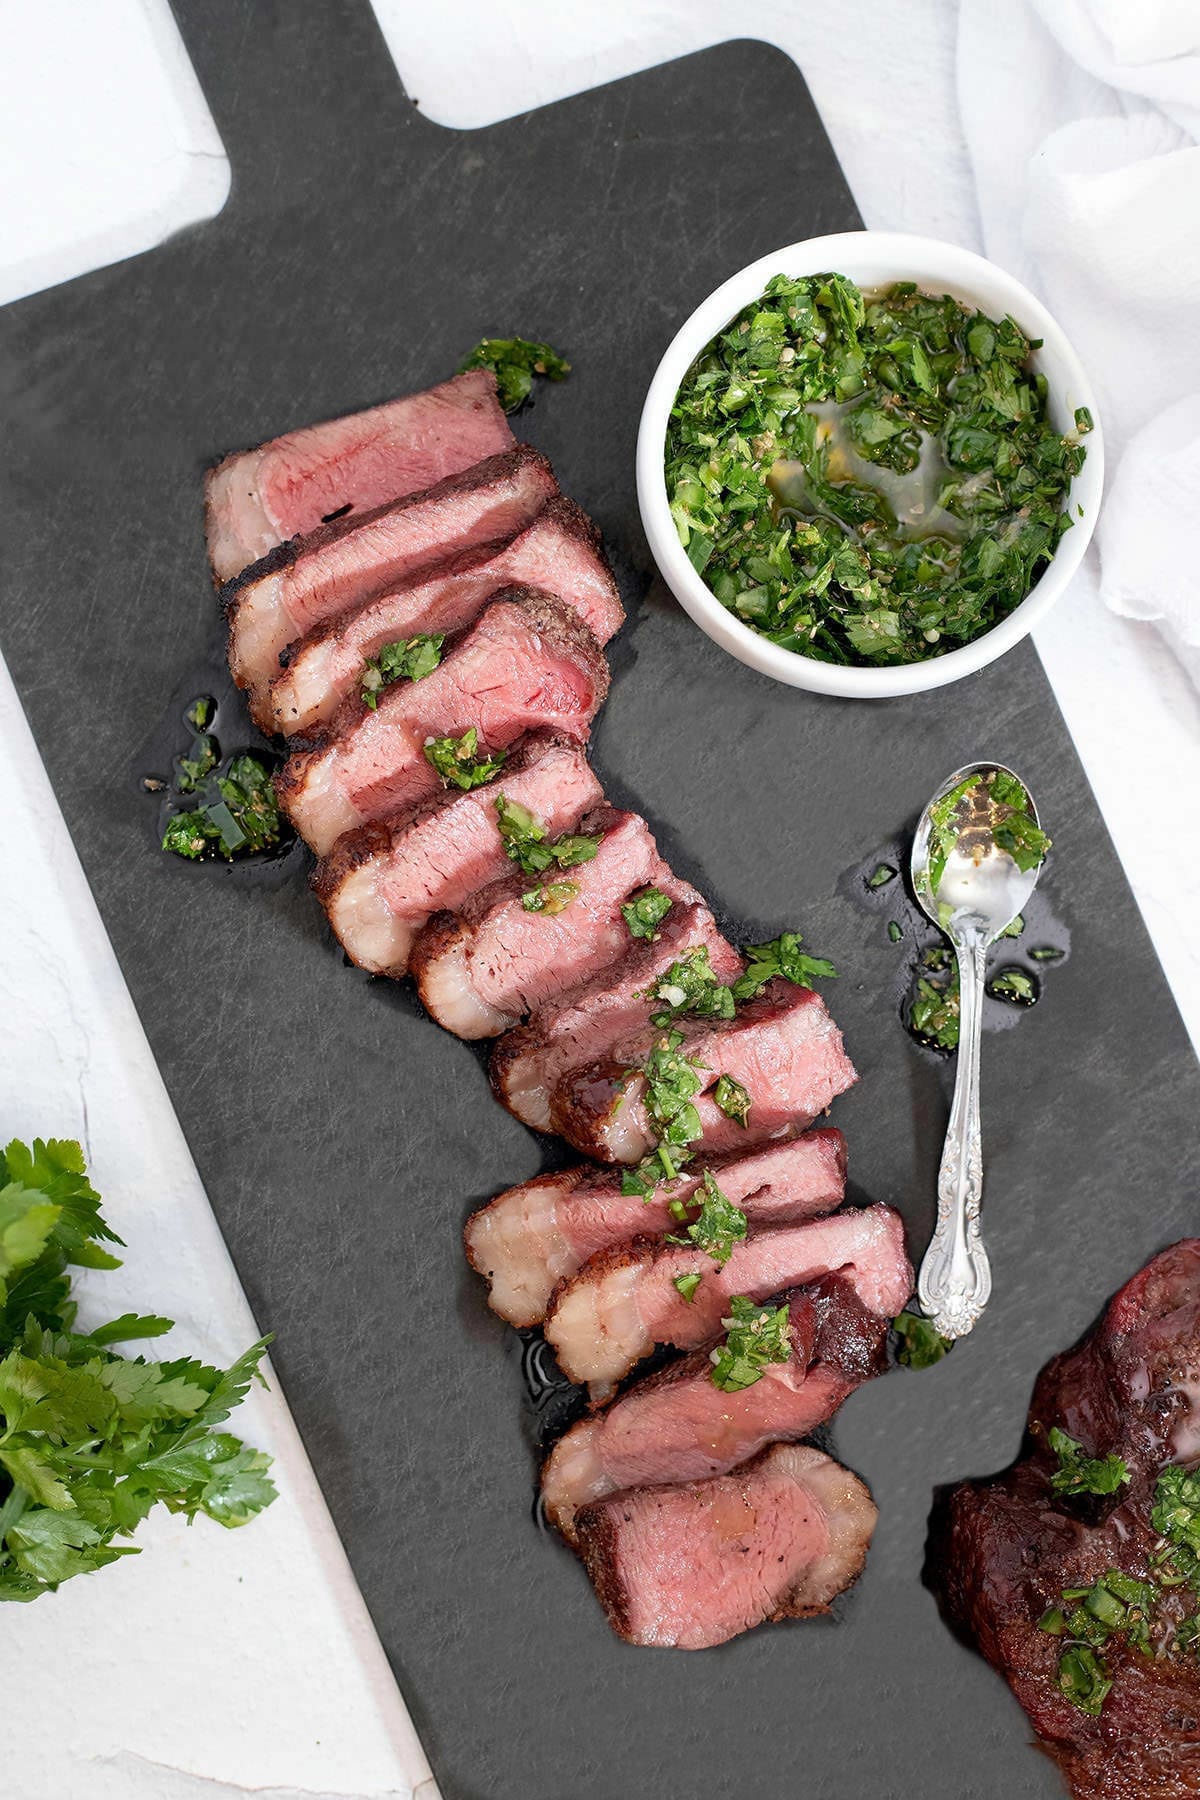 Picanha Steak with Authentic Chimichurri Sauce